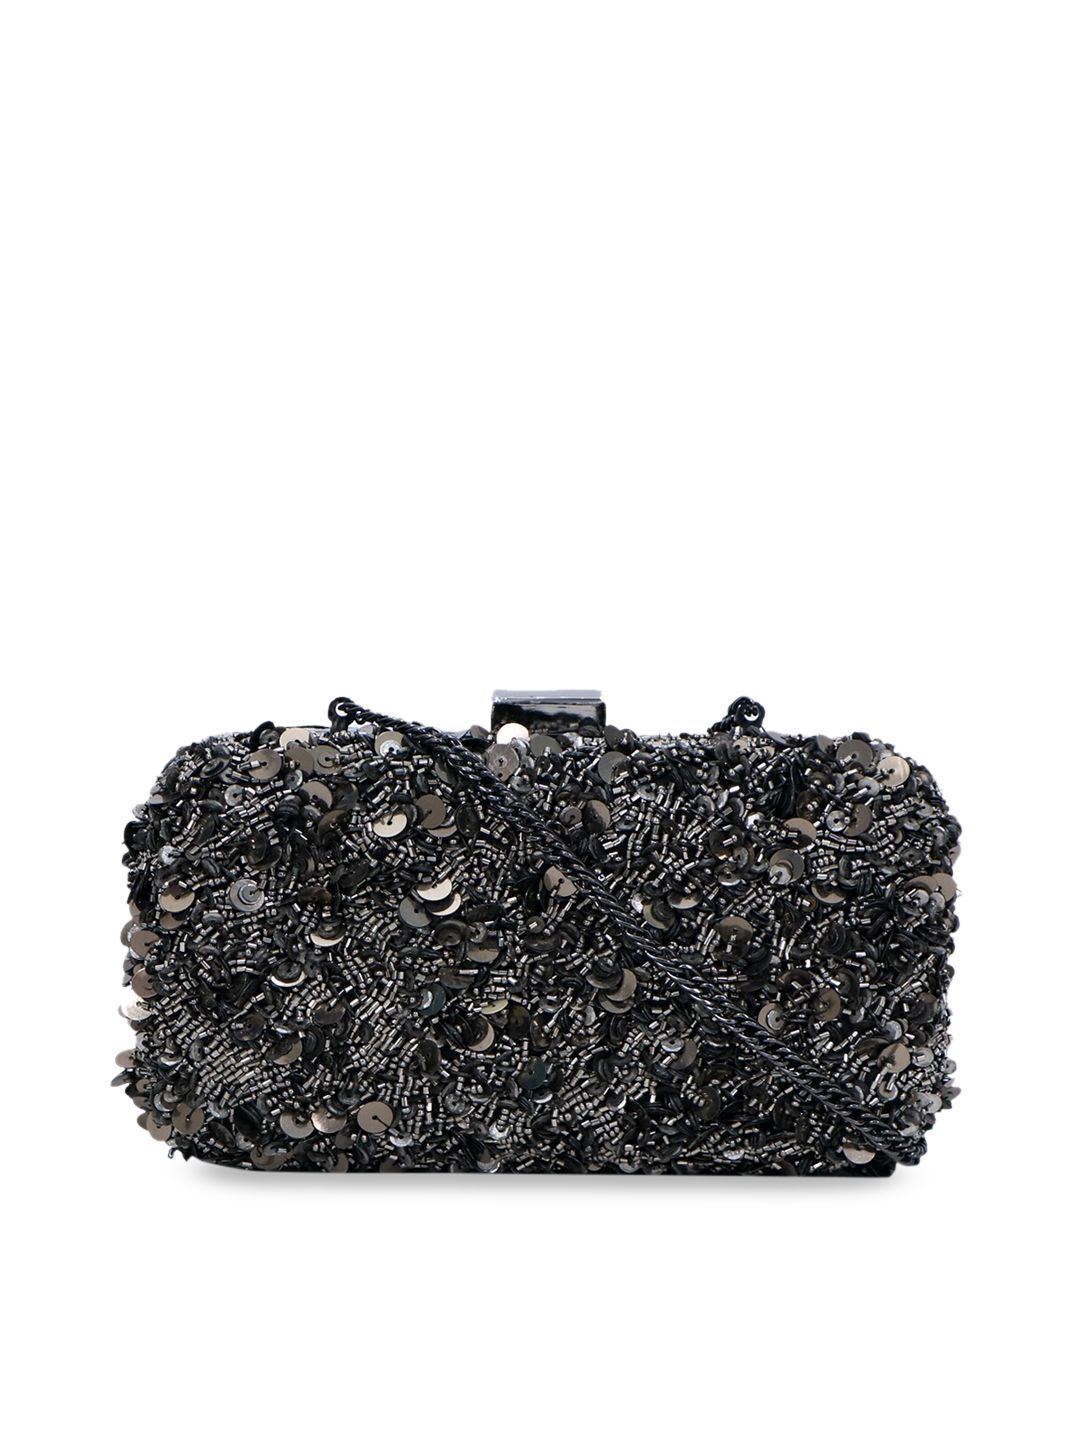 Diwaah Silver-Toned Embellished Clutch